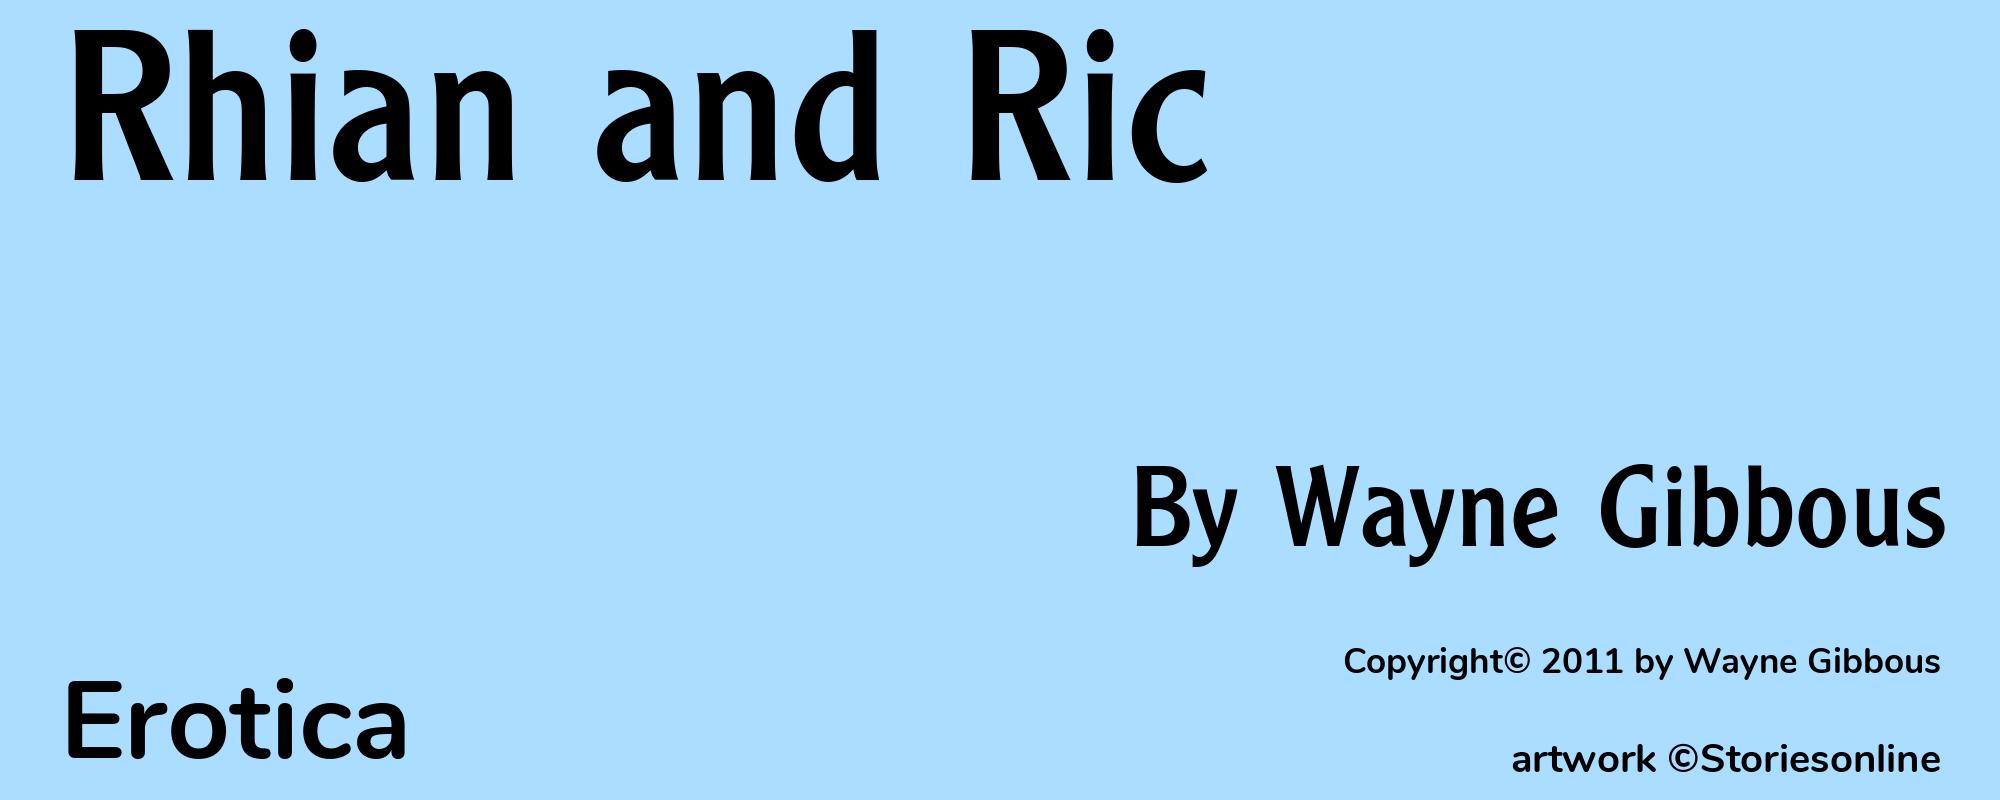 Rhian and Ric - Cover